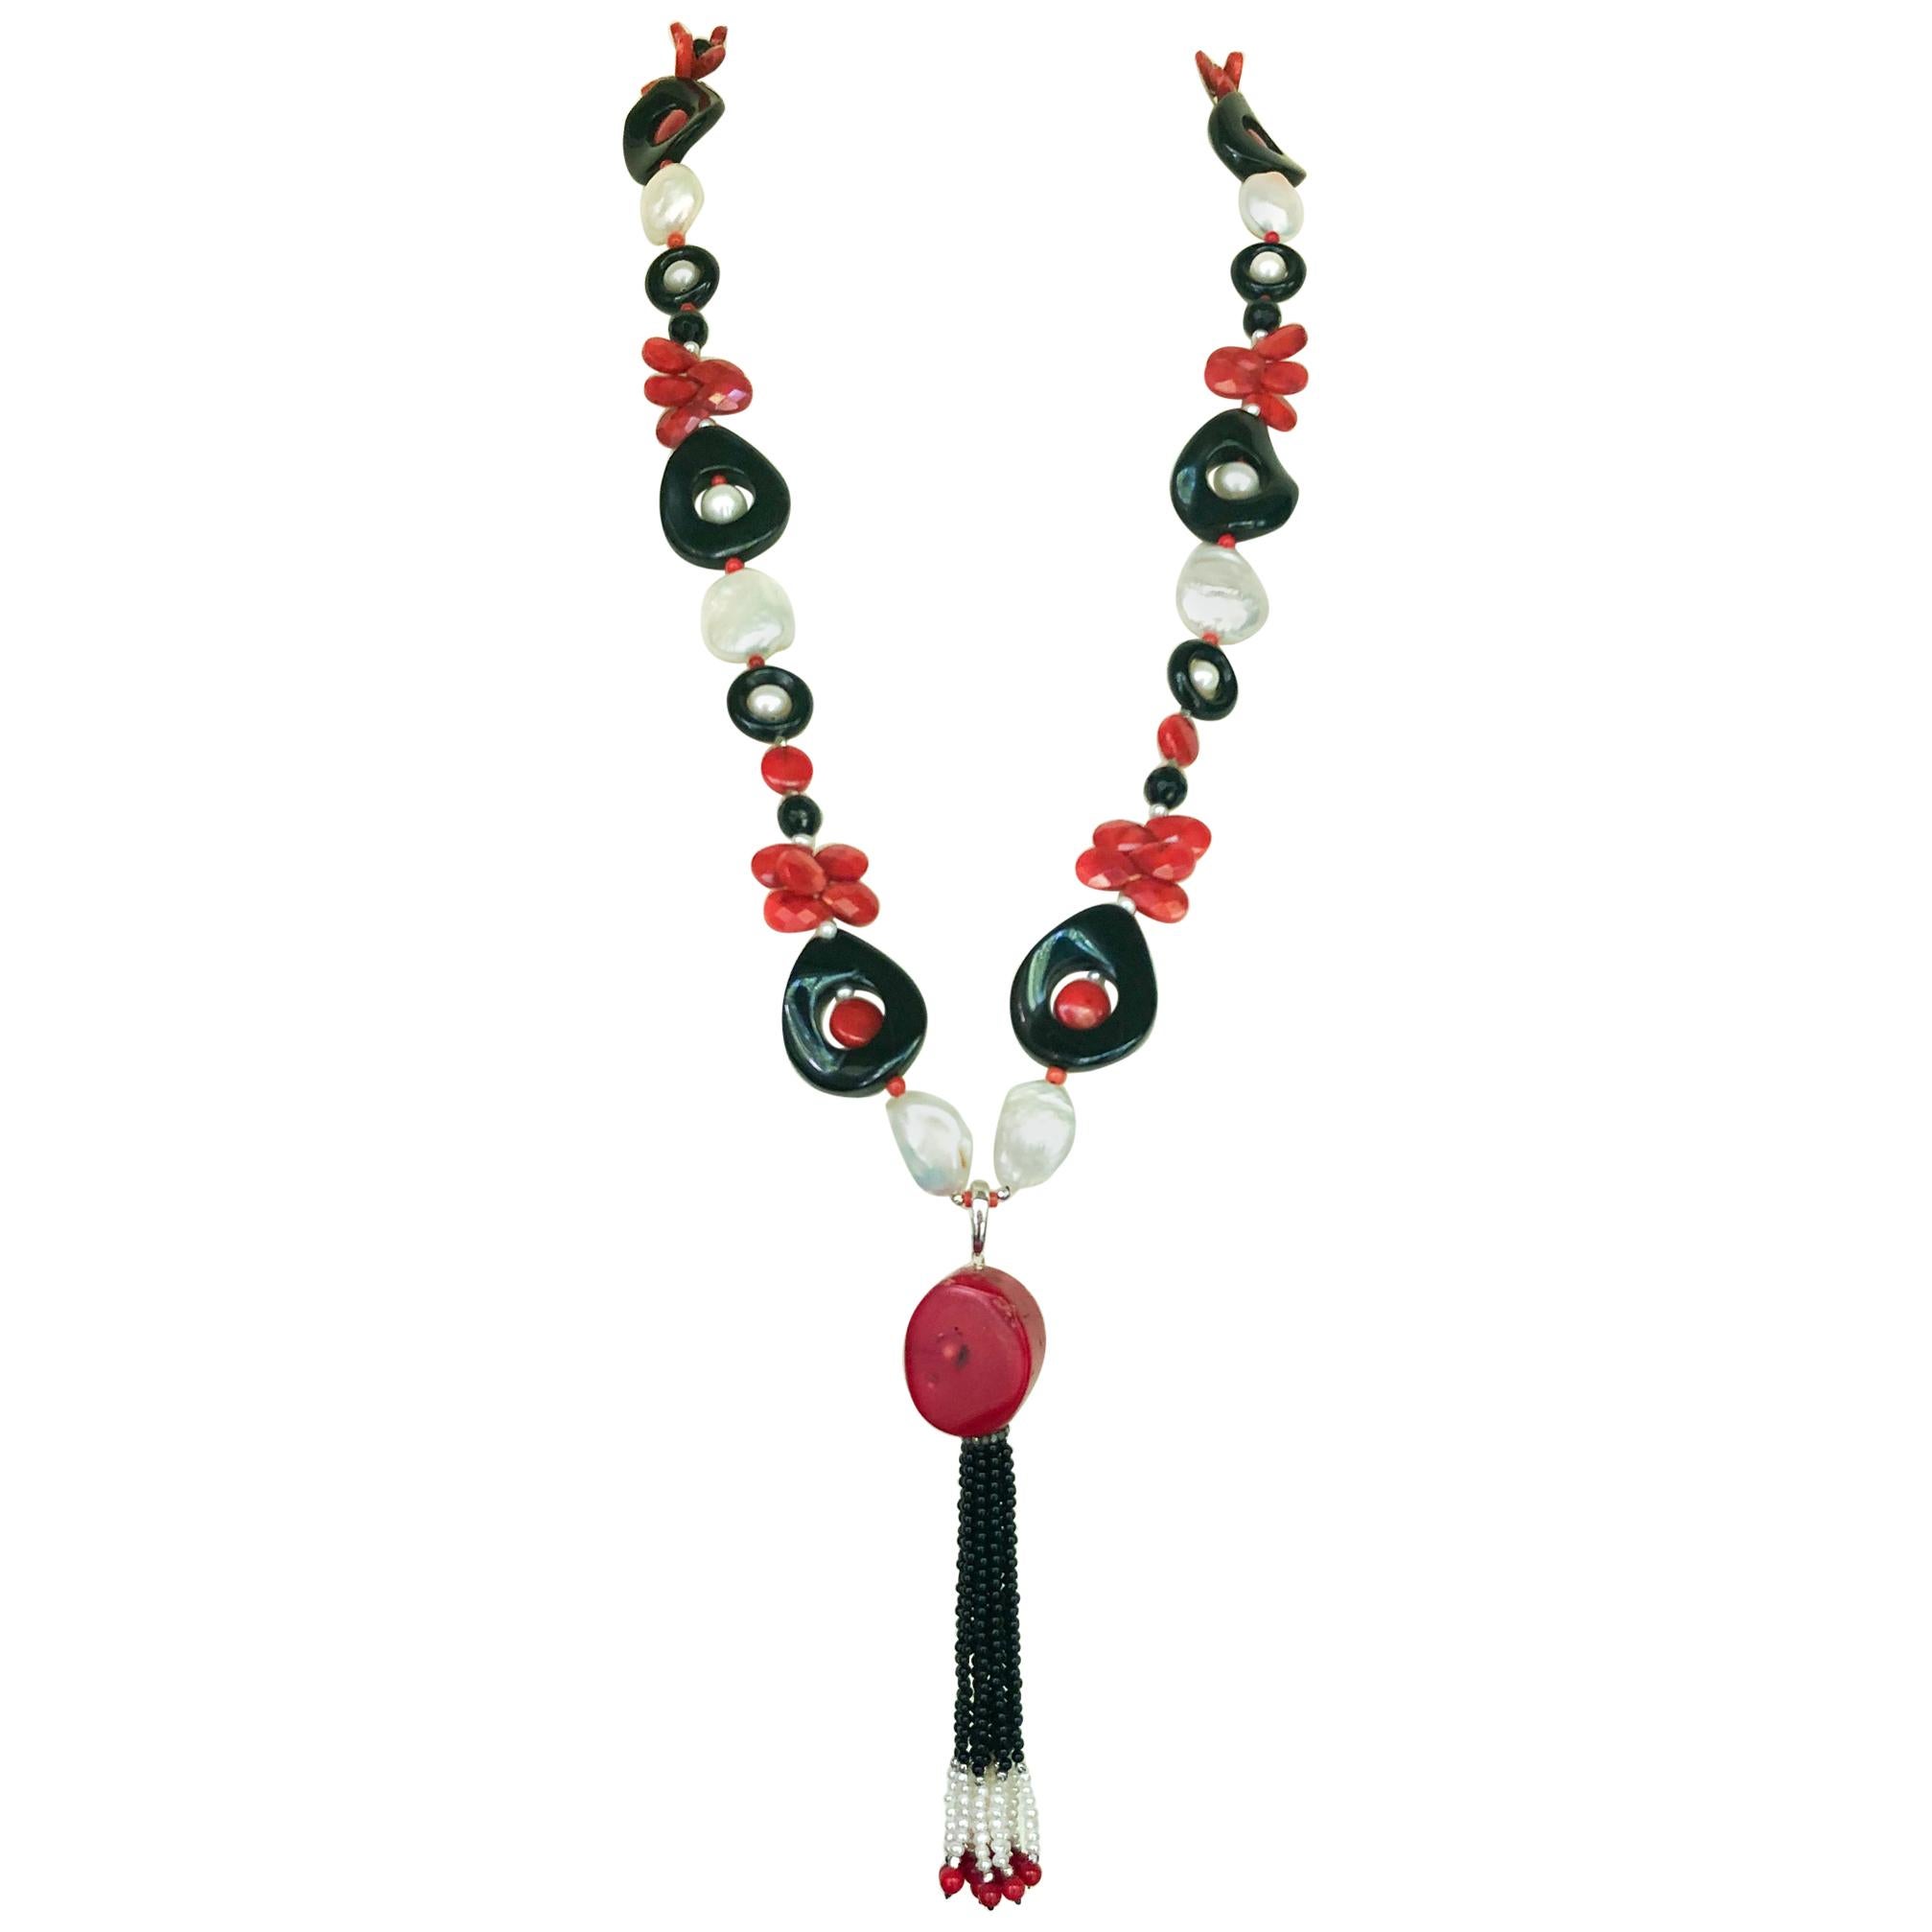 Marina J. Art Deco Style Sautoir Necklace with Pearl, Coral, Onyx and Tassel